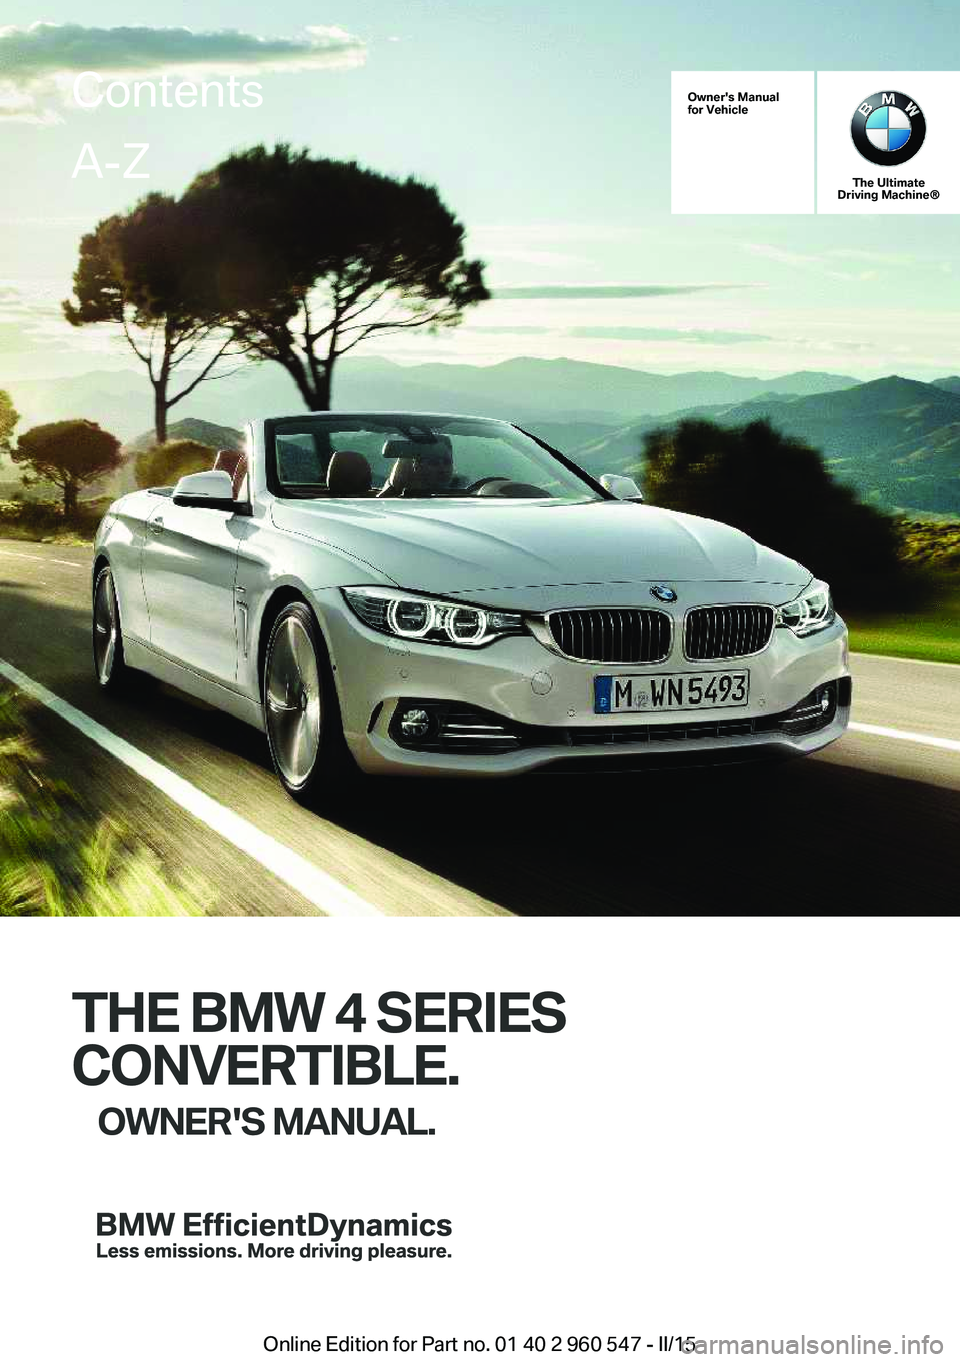 BMW 428I CONVERTIBLE 2016  Owners Manual Owner's Manual
for Vehicle
The Ultimate
Driving Machine®
THE BMW 4 SERIES
CONVERTIBLE. OWNER'S MANUAL.
ContentsA-Z
Online Edition for Part no. 01 40 2 960 547 - II/15   